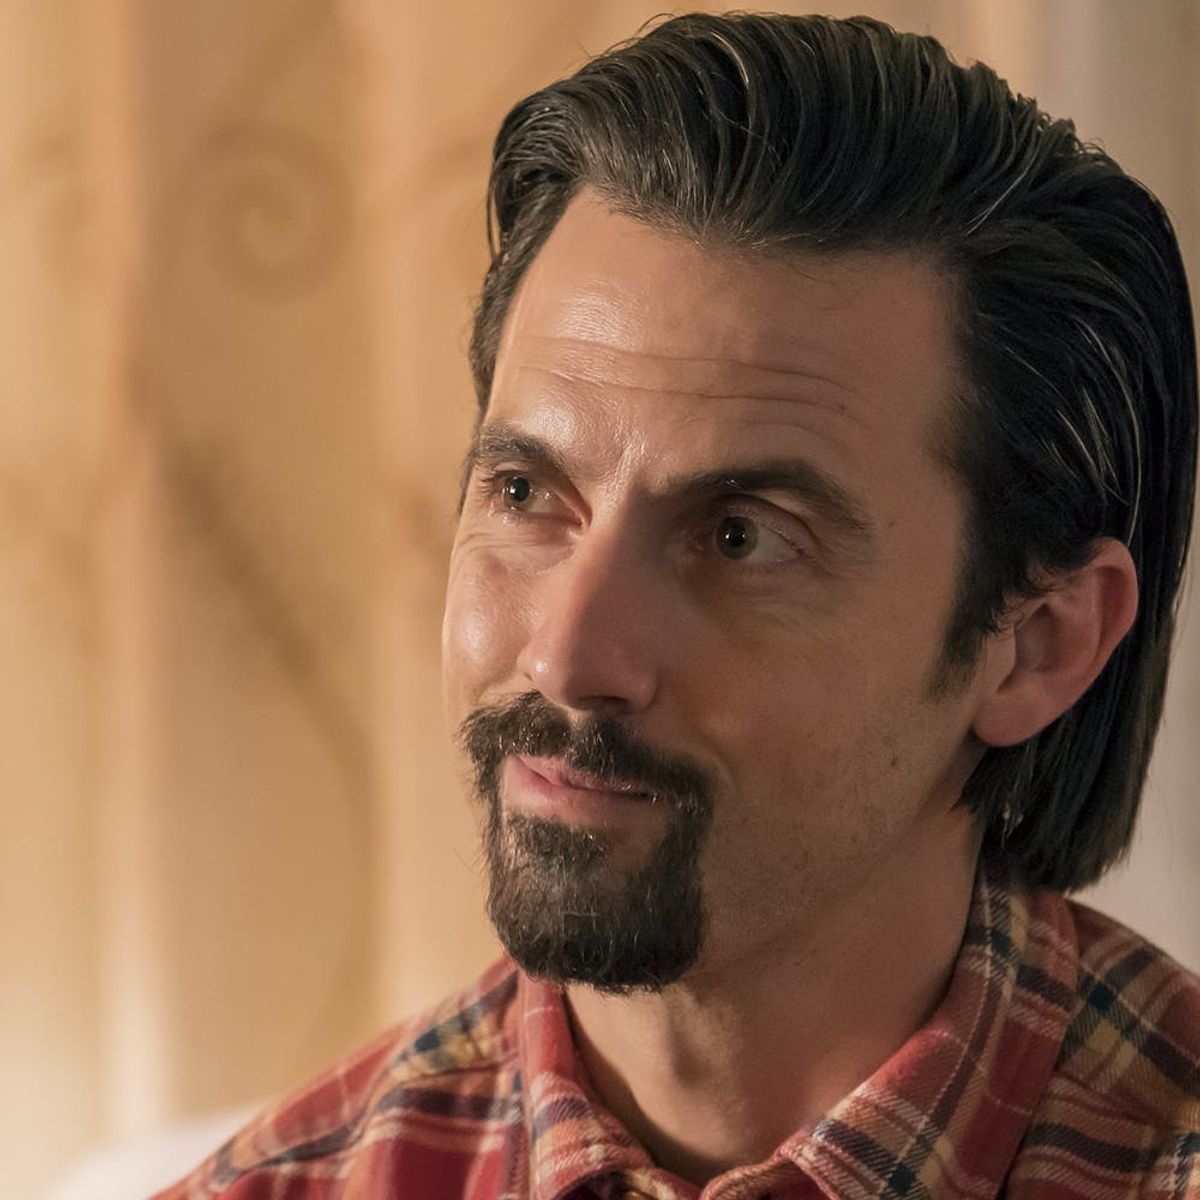 Crock-Pot Issued an Official Statement About That Tragic ‘This Is Us’ Twist